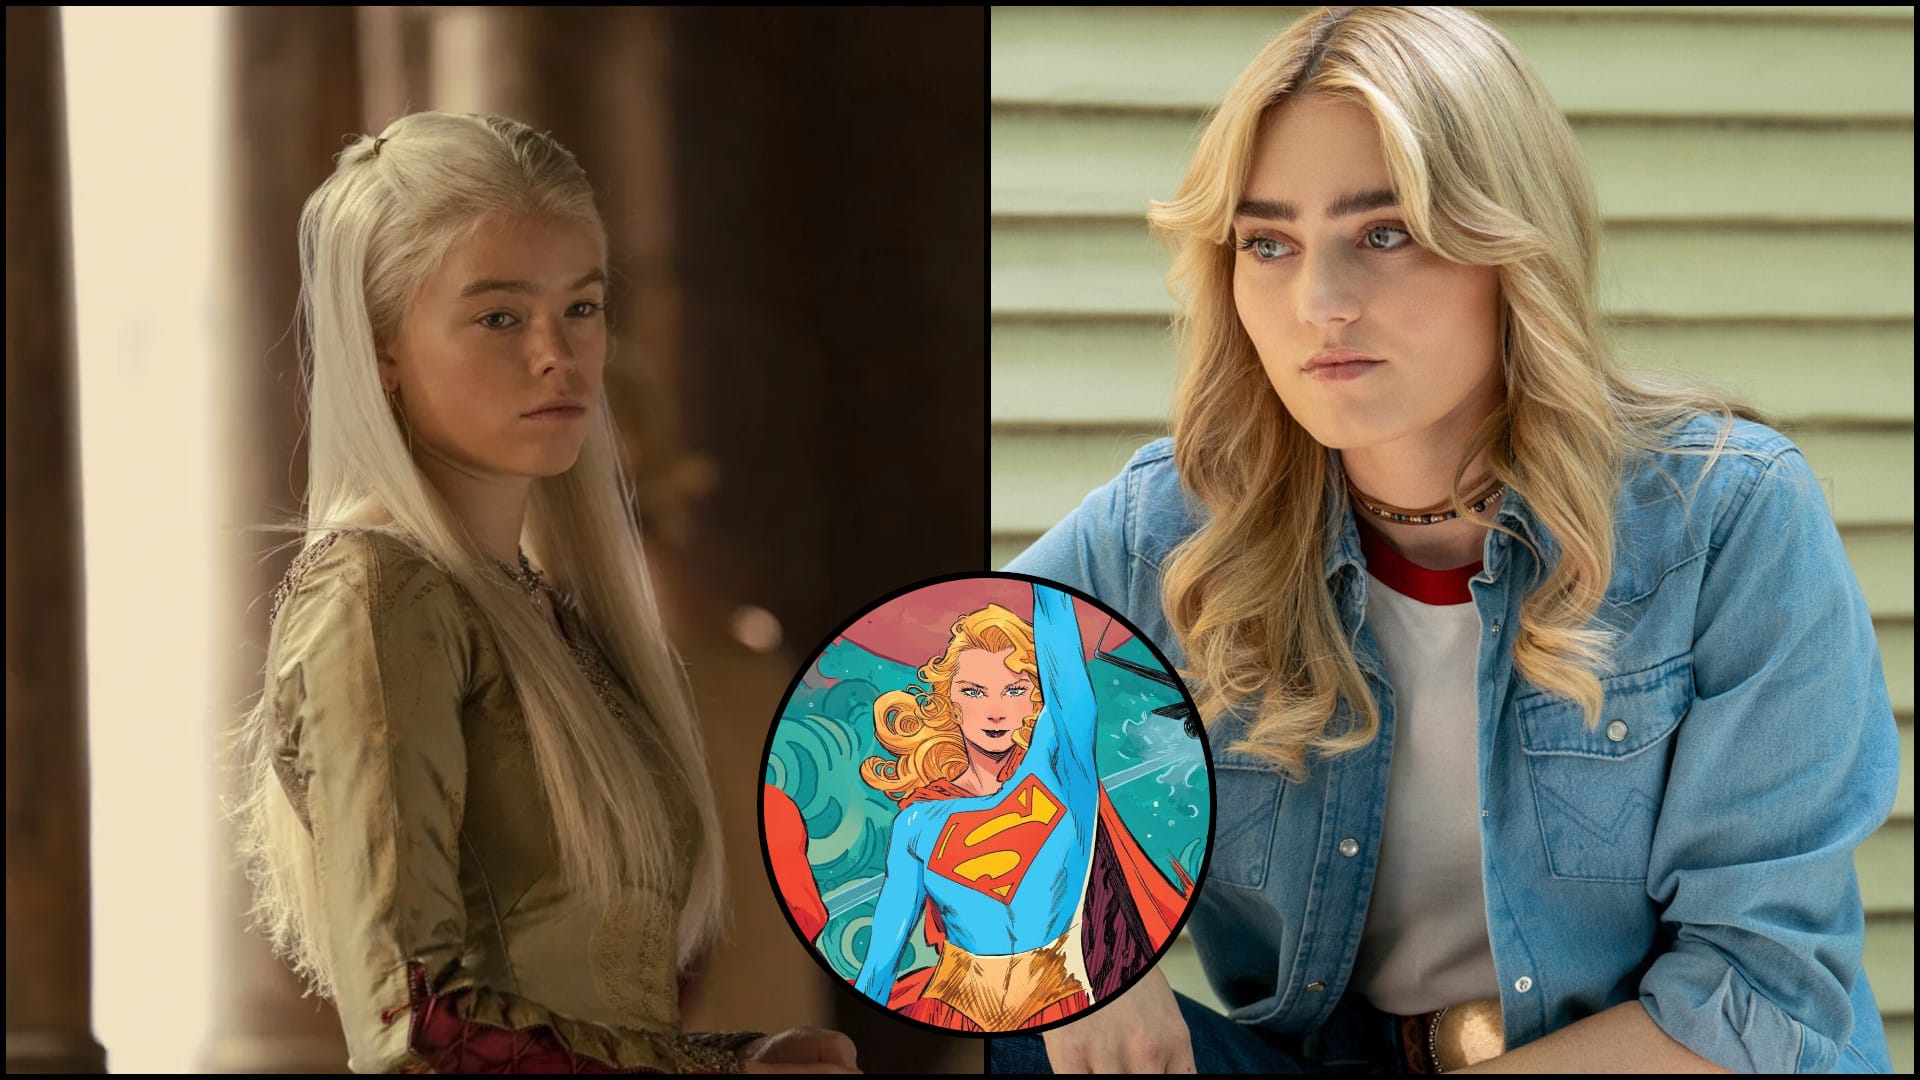 Milly Alcock e Meg Donnelly supergirl